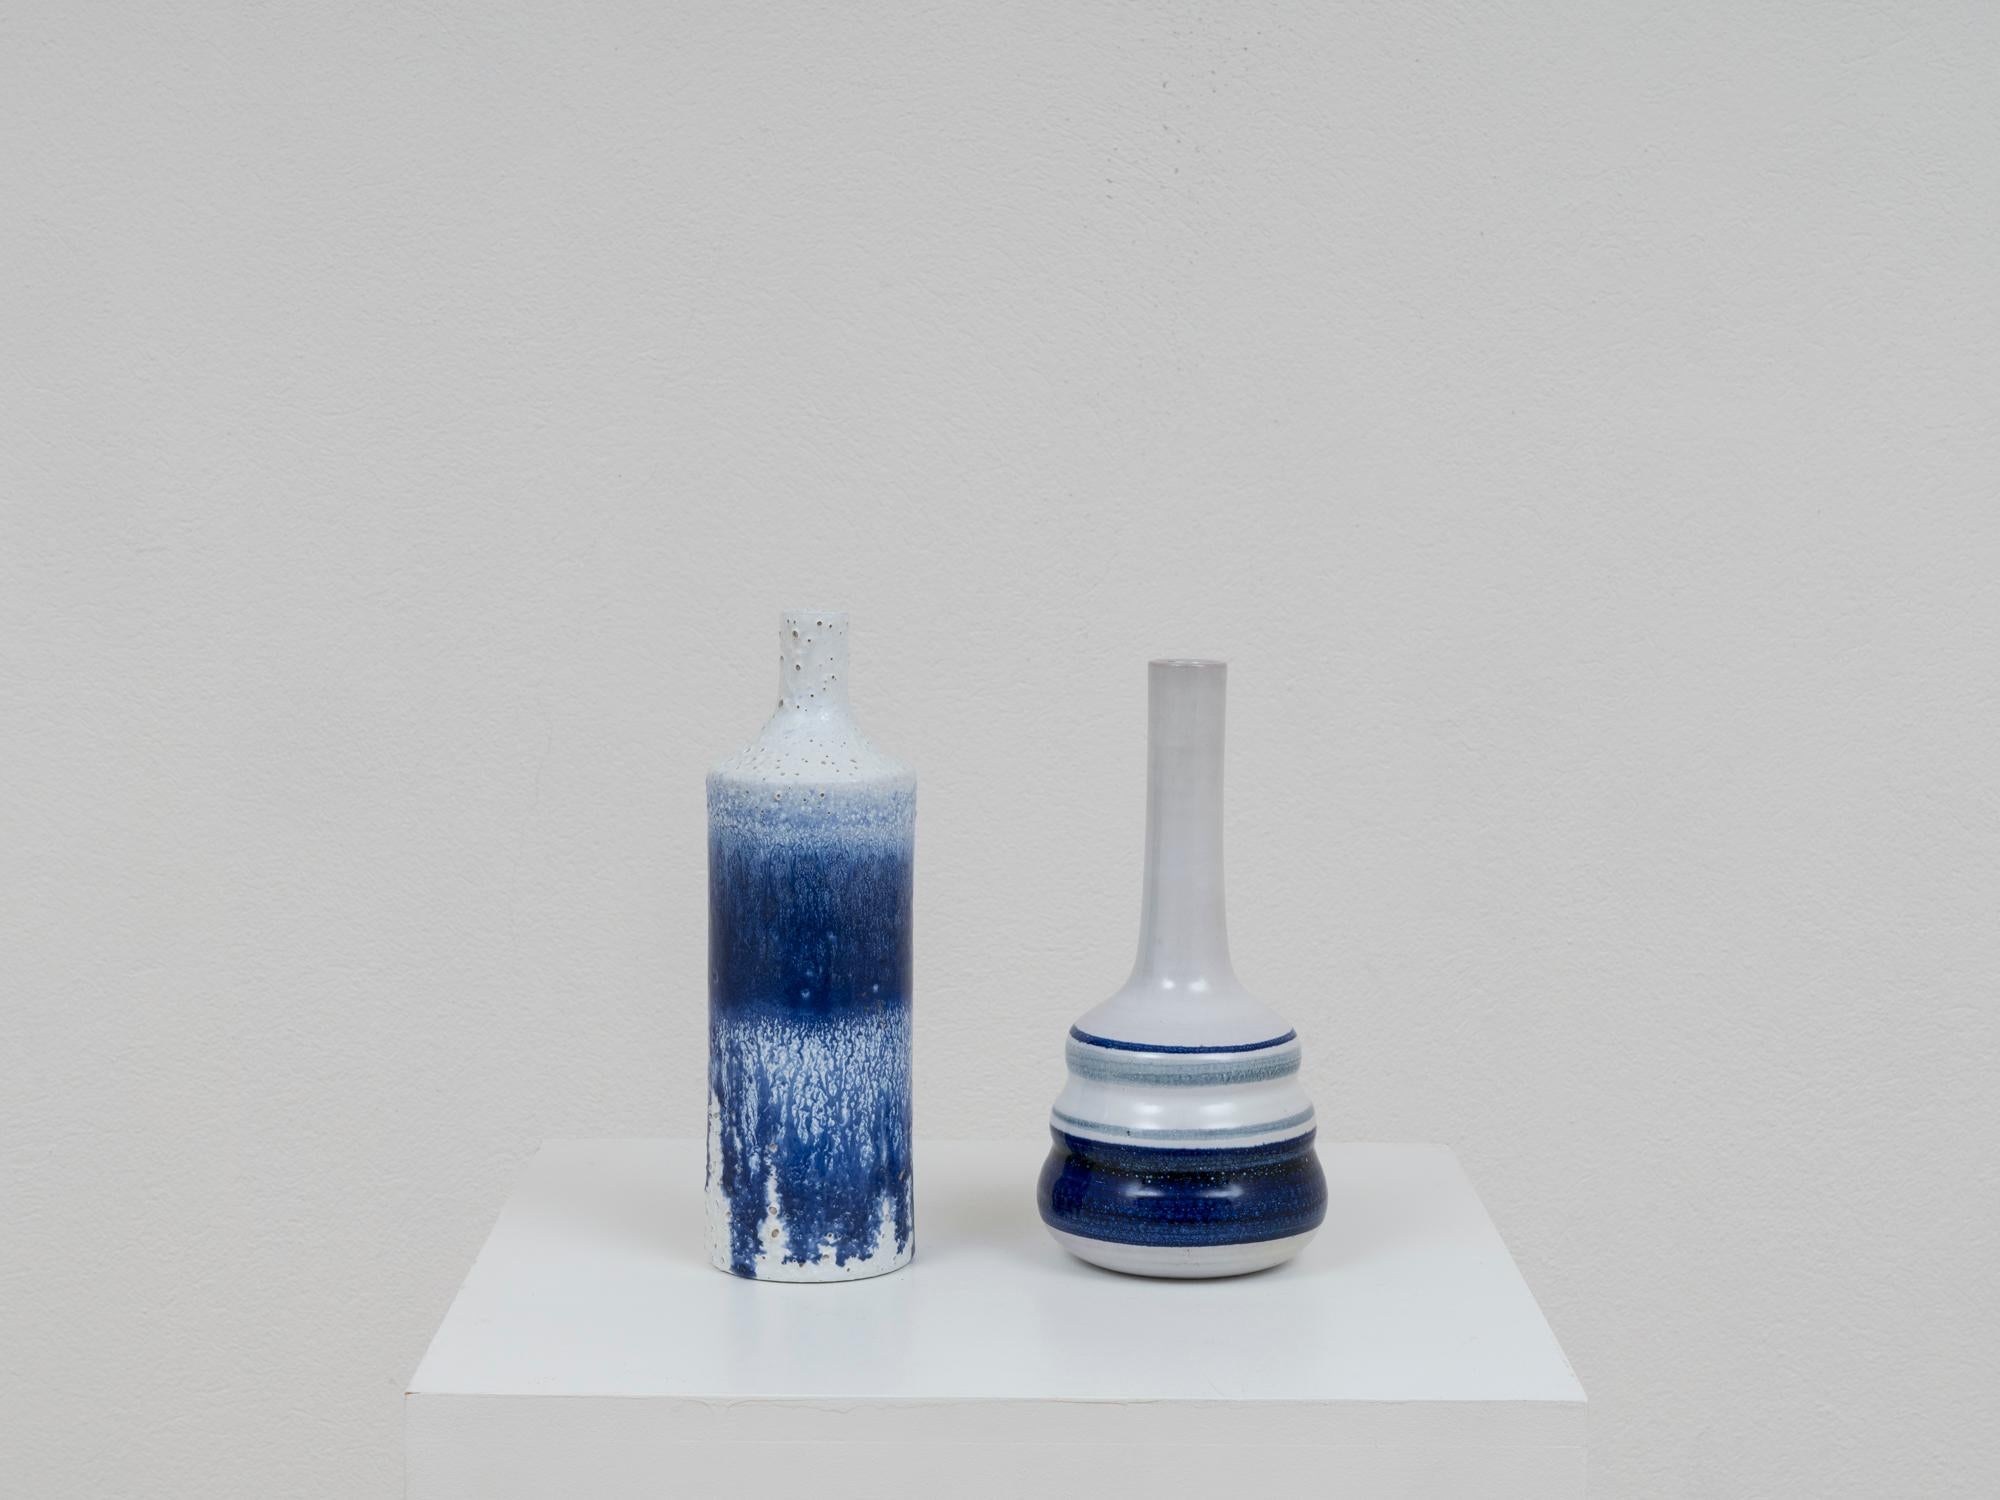 Pair of ceramic bottles vase by Pino Castagna, with blue and white decor with a strong Mediterranean feeling. Enamel drippings and tactile finishing to one bottle. This pieces was manufactured in the artist's laboratoy in Costermano, near the Garda